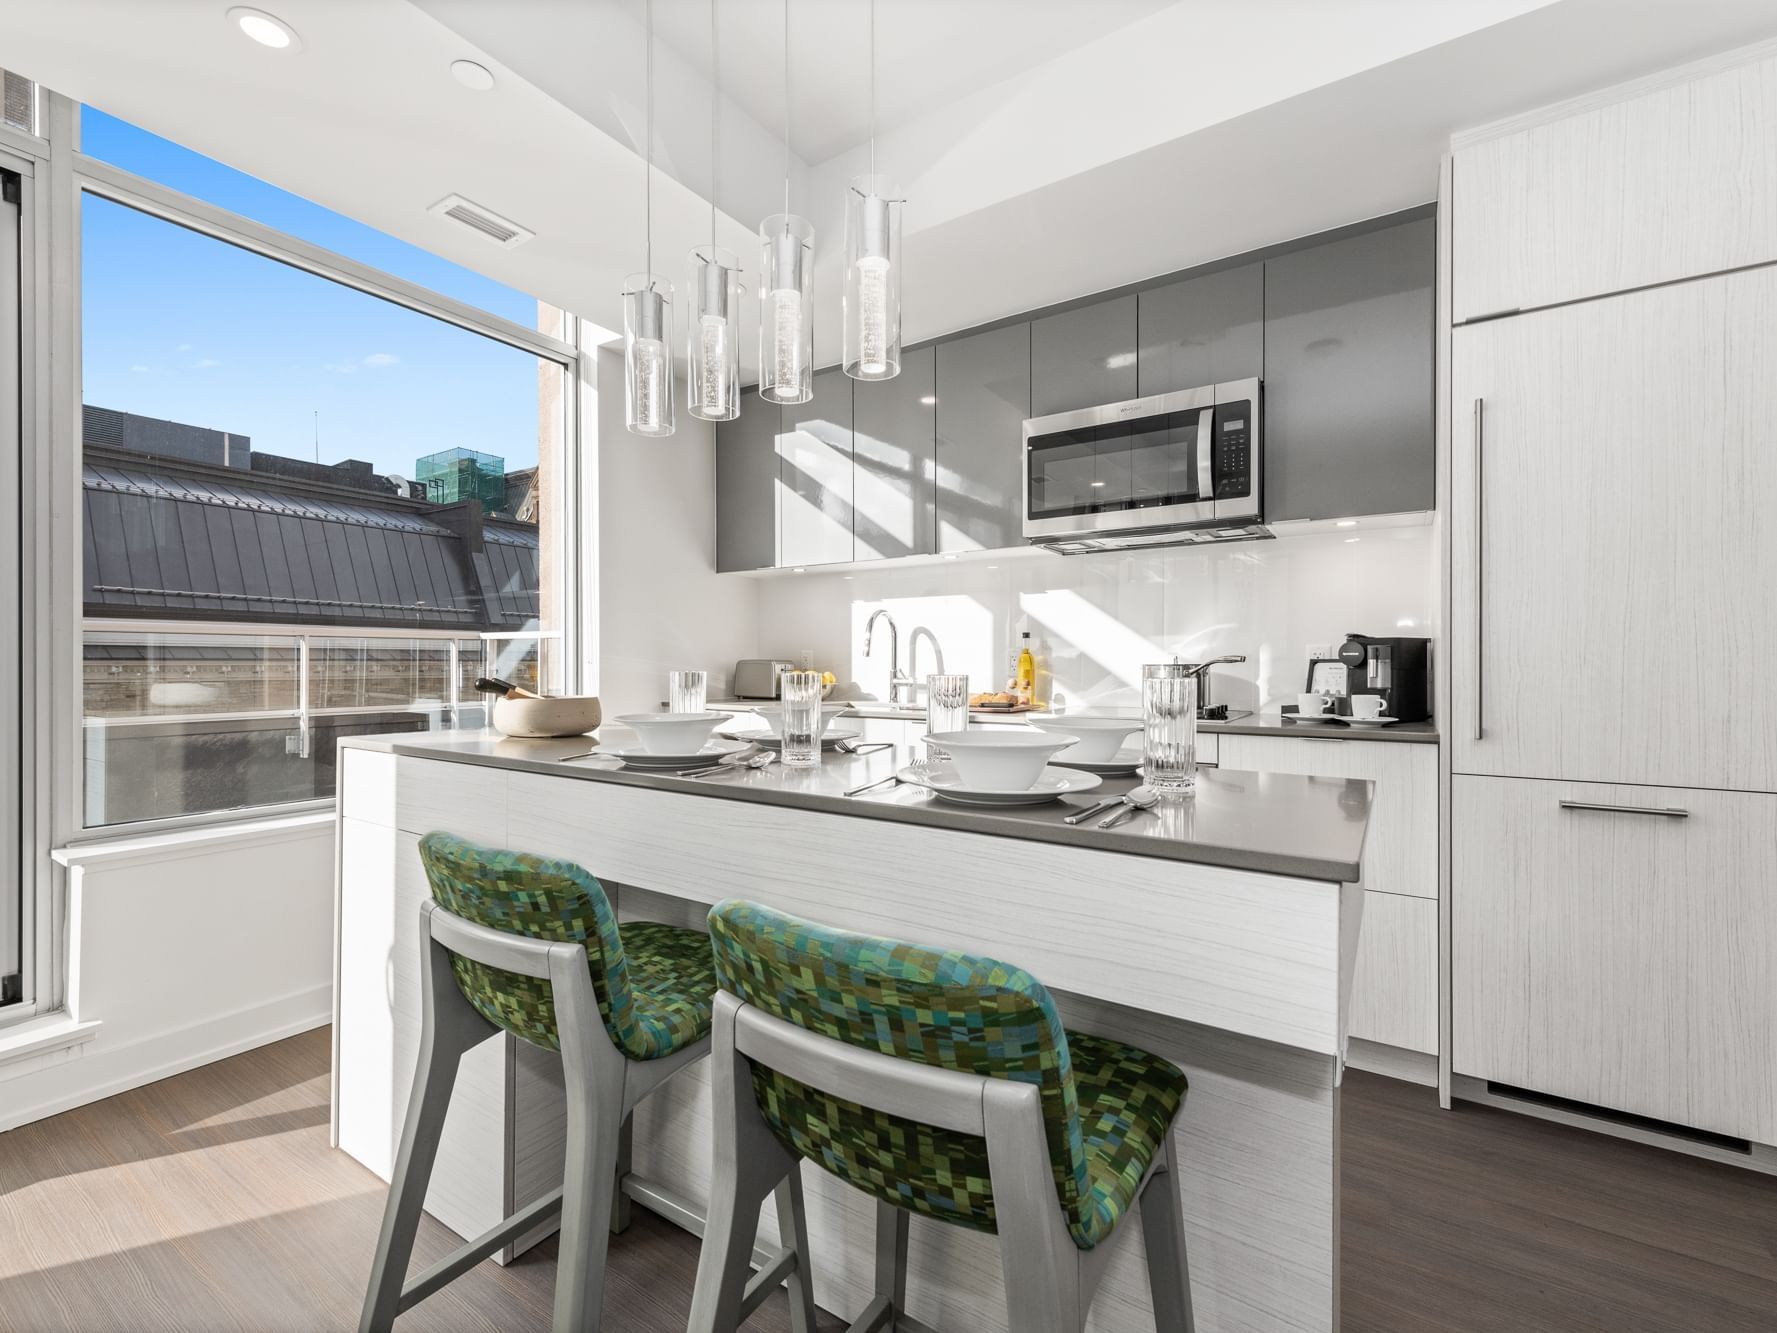 Two-bedroom Suite Sparks kitchen area at ReStays Ottawa